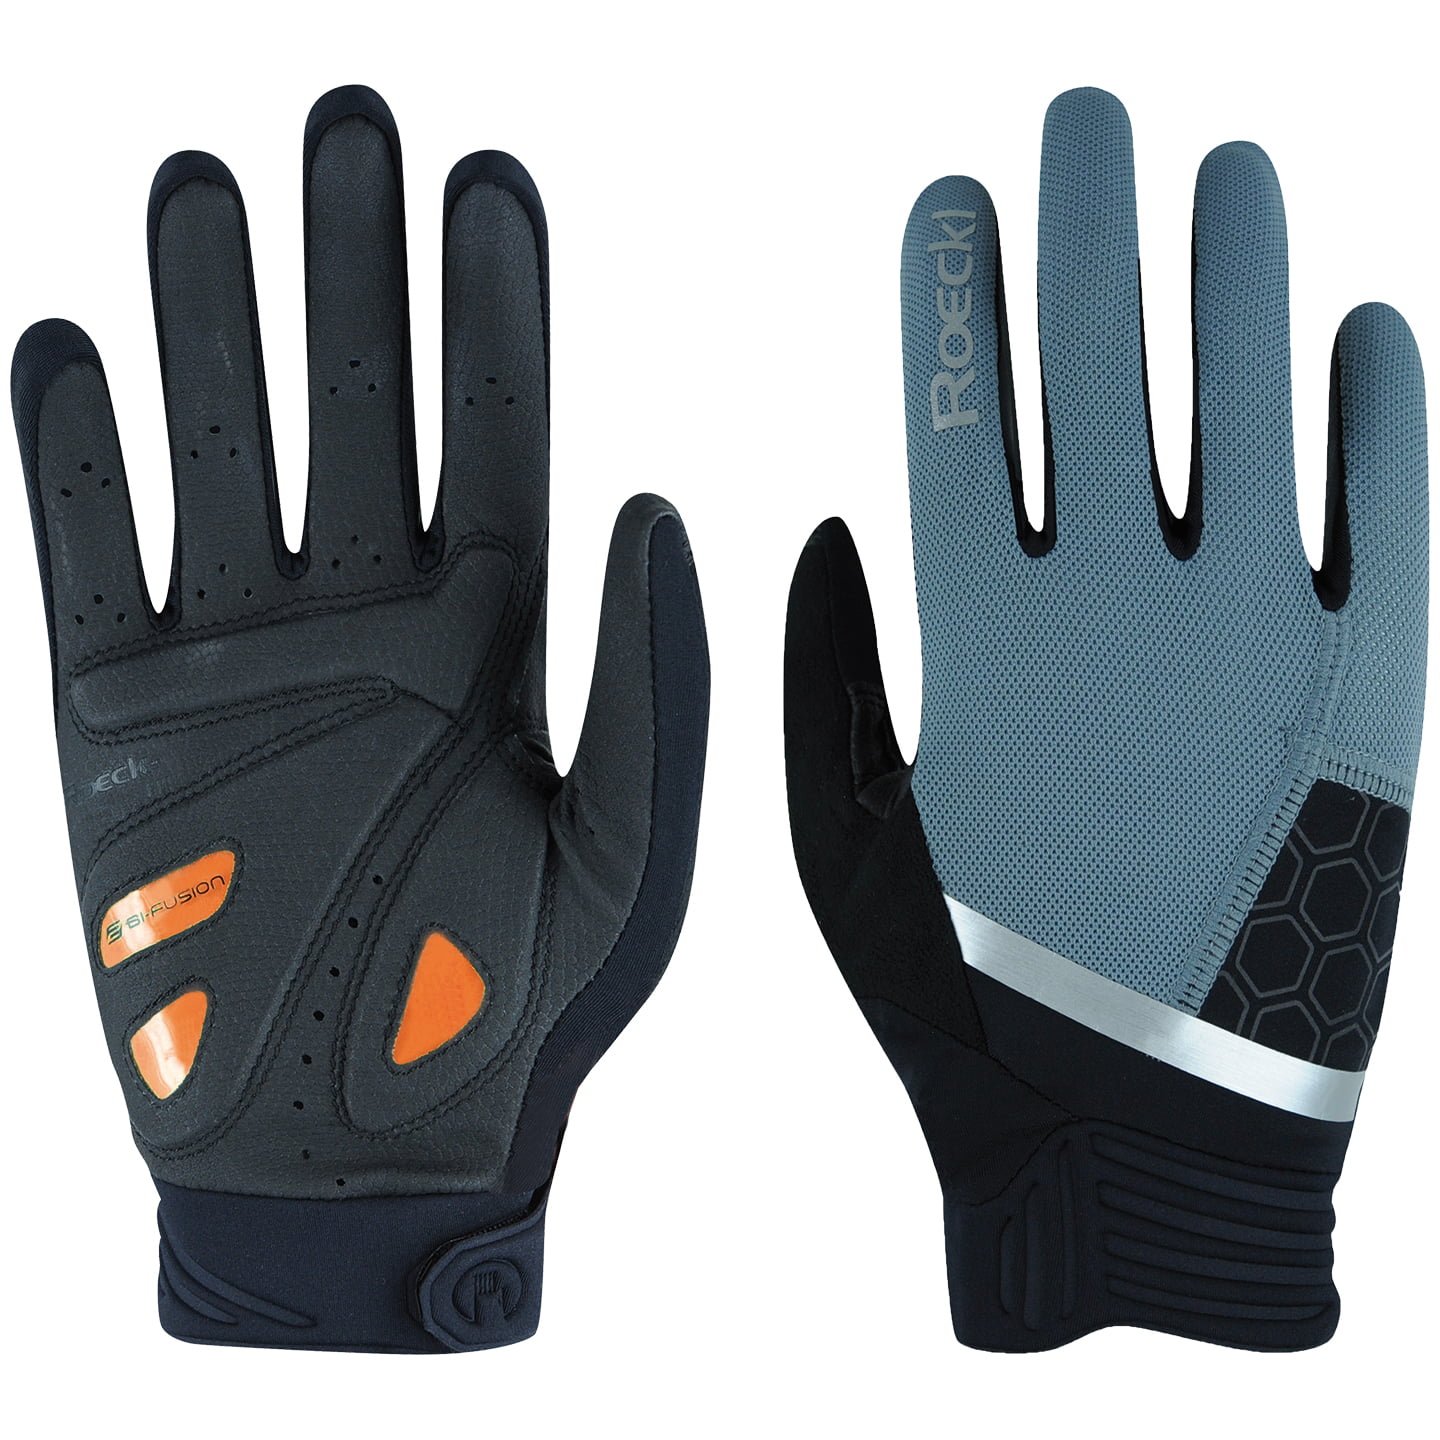 ROECKL Morgex Full Finger Gloves Cycling Gloves, for men, size 9,5, Bike gloves, Cycling wear